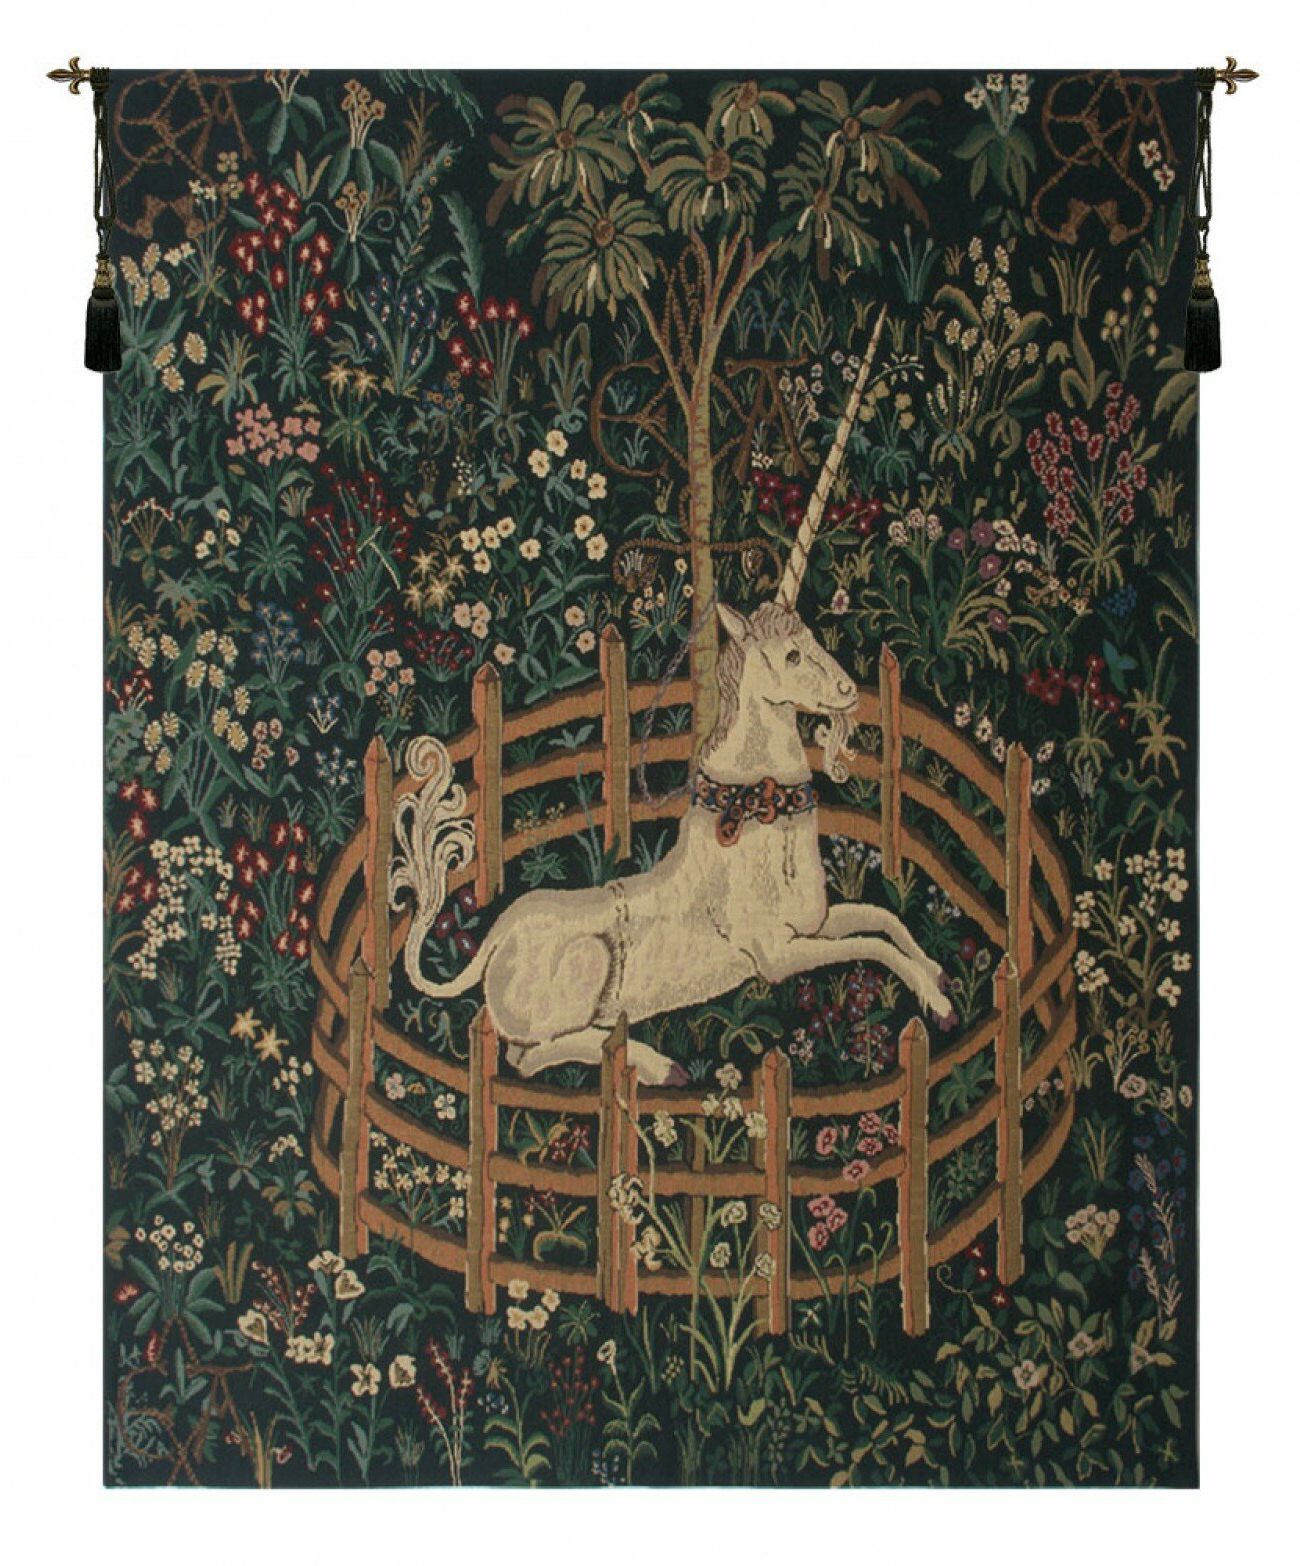 2020 Unicorn In Captivity Ii Wall Hanging Inside Blended Fabric Unicorn In Captivity Ii (with Border) Wall Hangings (View 1 of 20)